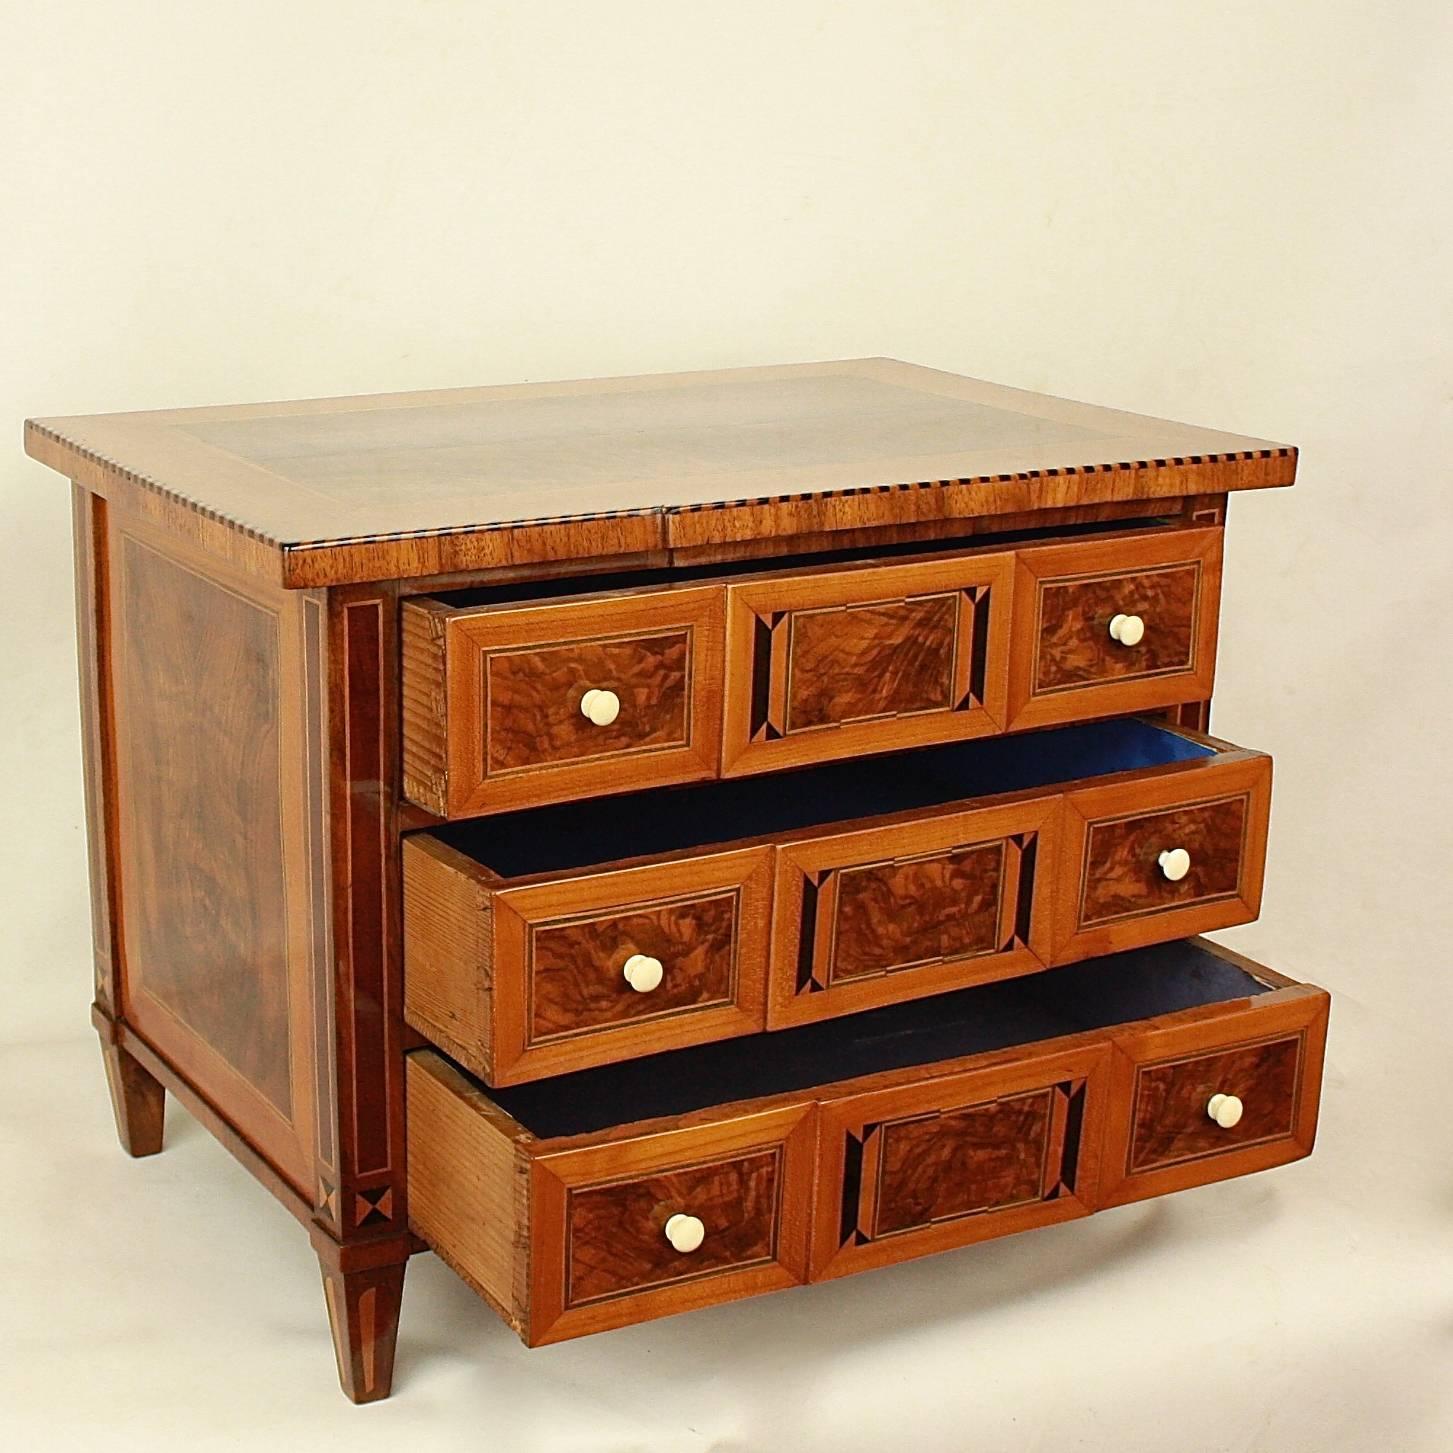 An 18th century Louis XVI miniature marquetry commode, a scaled replica of a Louis XVI chest of drawers. With a veneered top above three drawers of breakfront form, with very fine marquetry and banding using ebonized wood, walnut, mahogany and